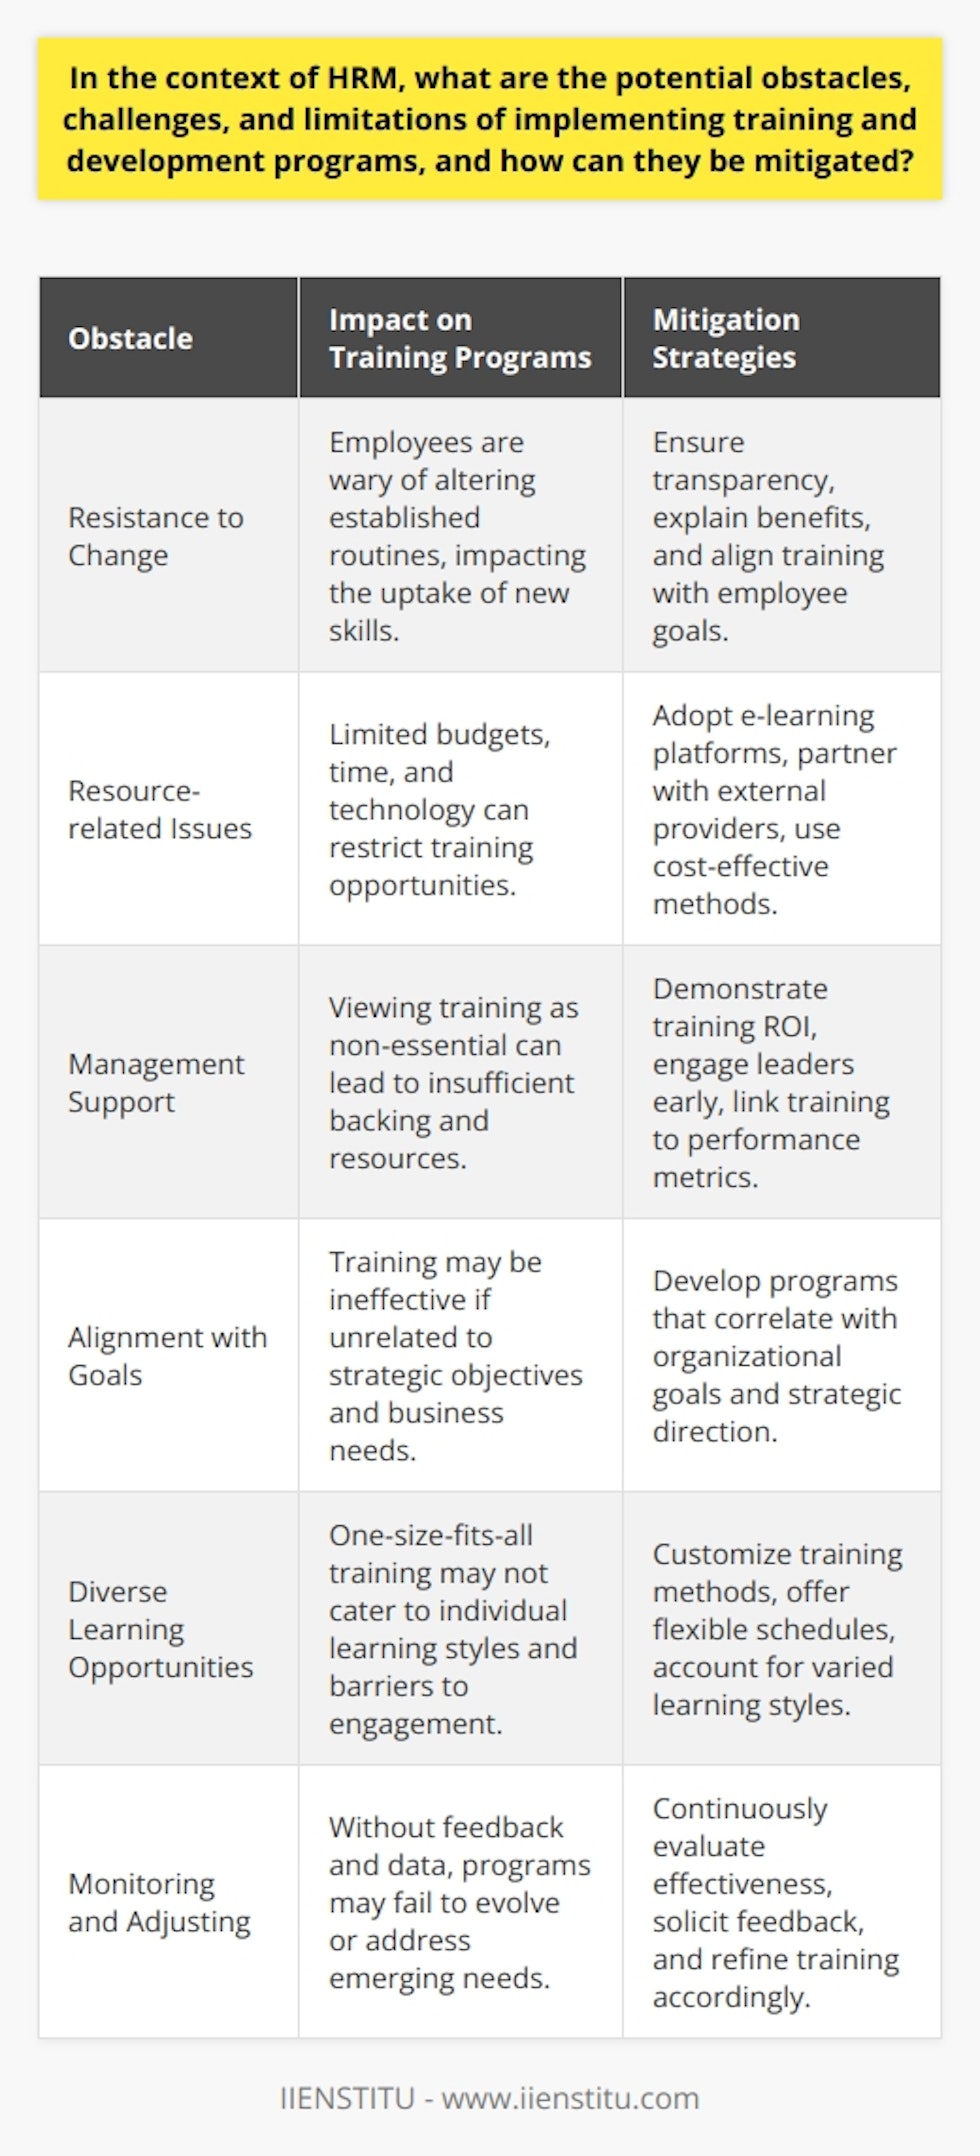 In the sphere of Human Resource Management (HRM), the rollout of training and development initiatives frequently encounters myriads of constraints and hindrances. Nonetheless, these impediments can be mitigated tactically to enhance the efficacy of such programs.Resistance to ChangeA common obstacle in training implementation is employee resistance to change. Workers may be comfortable with established routines and skeptical about new methodologies introduced through training. To circumvent this reluctance, HR professionals need to ensure transparency. By clearly explaining the objectives, and expected outcomes of the training, employees can understand the personal and organizational benefits, easing their apprehension.Resource-related IssuesAnother significant barrier is the limitation of resources, such as restricted budgets, insufficient time, and inadequate technology infrastructure. In this vein, HR departments can shift towards online learning platforms. E-learning tools can provide a flexible and cost-effective means of delivering training. Moreover, leveraging collaborations or partnerships with specialized external providers, such as IIENSTITU, which offers a range of professional courses, can help supplement in-house resources and expertise. This collaboration can include the creation of custom training content or entire programs tailored to specific organizational needs.Management SupportFurthermore, training programs often falter due to the lack of endorsement from senior management. Training is sometimes viewed as a luxury rather than a necessity. Overturning this mindset requires HR to demonstrate the value of training through quantifiable data showing the positive impact on the organization's bottom line. This could mean correlating training efforts with improved performance metrics, decreased turnover rates, or a boost in customer satisfaction scores.Mitigation StrategiesTo counteract these challenges, HR departments can implement several strategies:1. Involve leadership: Engage senior management early in the training design process and maintain open communication about the expected ROI.2. Align training with strategic goals: Develop training programs in sync with the organization's strategic objectives to underscore their relevance and urgency.3. Provide diverse learning opportunities: Customize training approaches to suit different learning styles and work schedules, enhancing employee engagement and knowledge retention.4. Monitor and adjust: Continually assess the effectiveness of training programs and be prepared to make iterative improvements based on feedback and performance data.When organizations strategically overcome the challenges associated with training and development, they can build a more knowledgeable, skilled, and resilient workforce, which is crucial for maintaining a competitive edge in the dynamic business landscape. Employing a meticulous approach to crafting and delivering training programs allows HRM to foster an environment of continuous learning and development, propelling both individuals and the organization toward success.